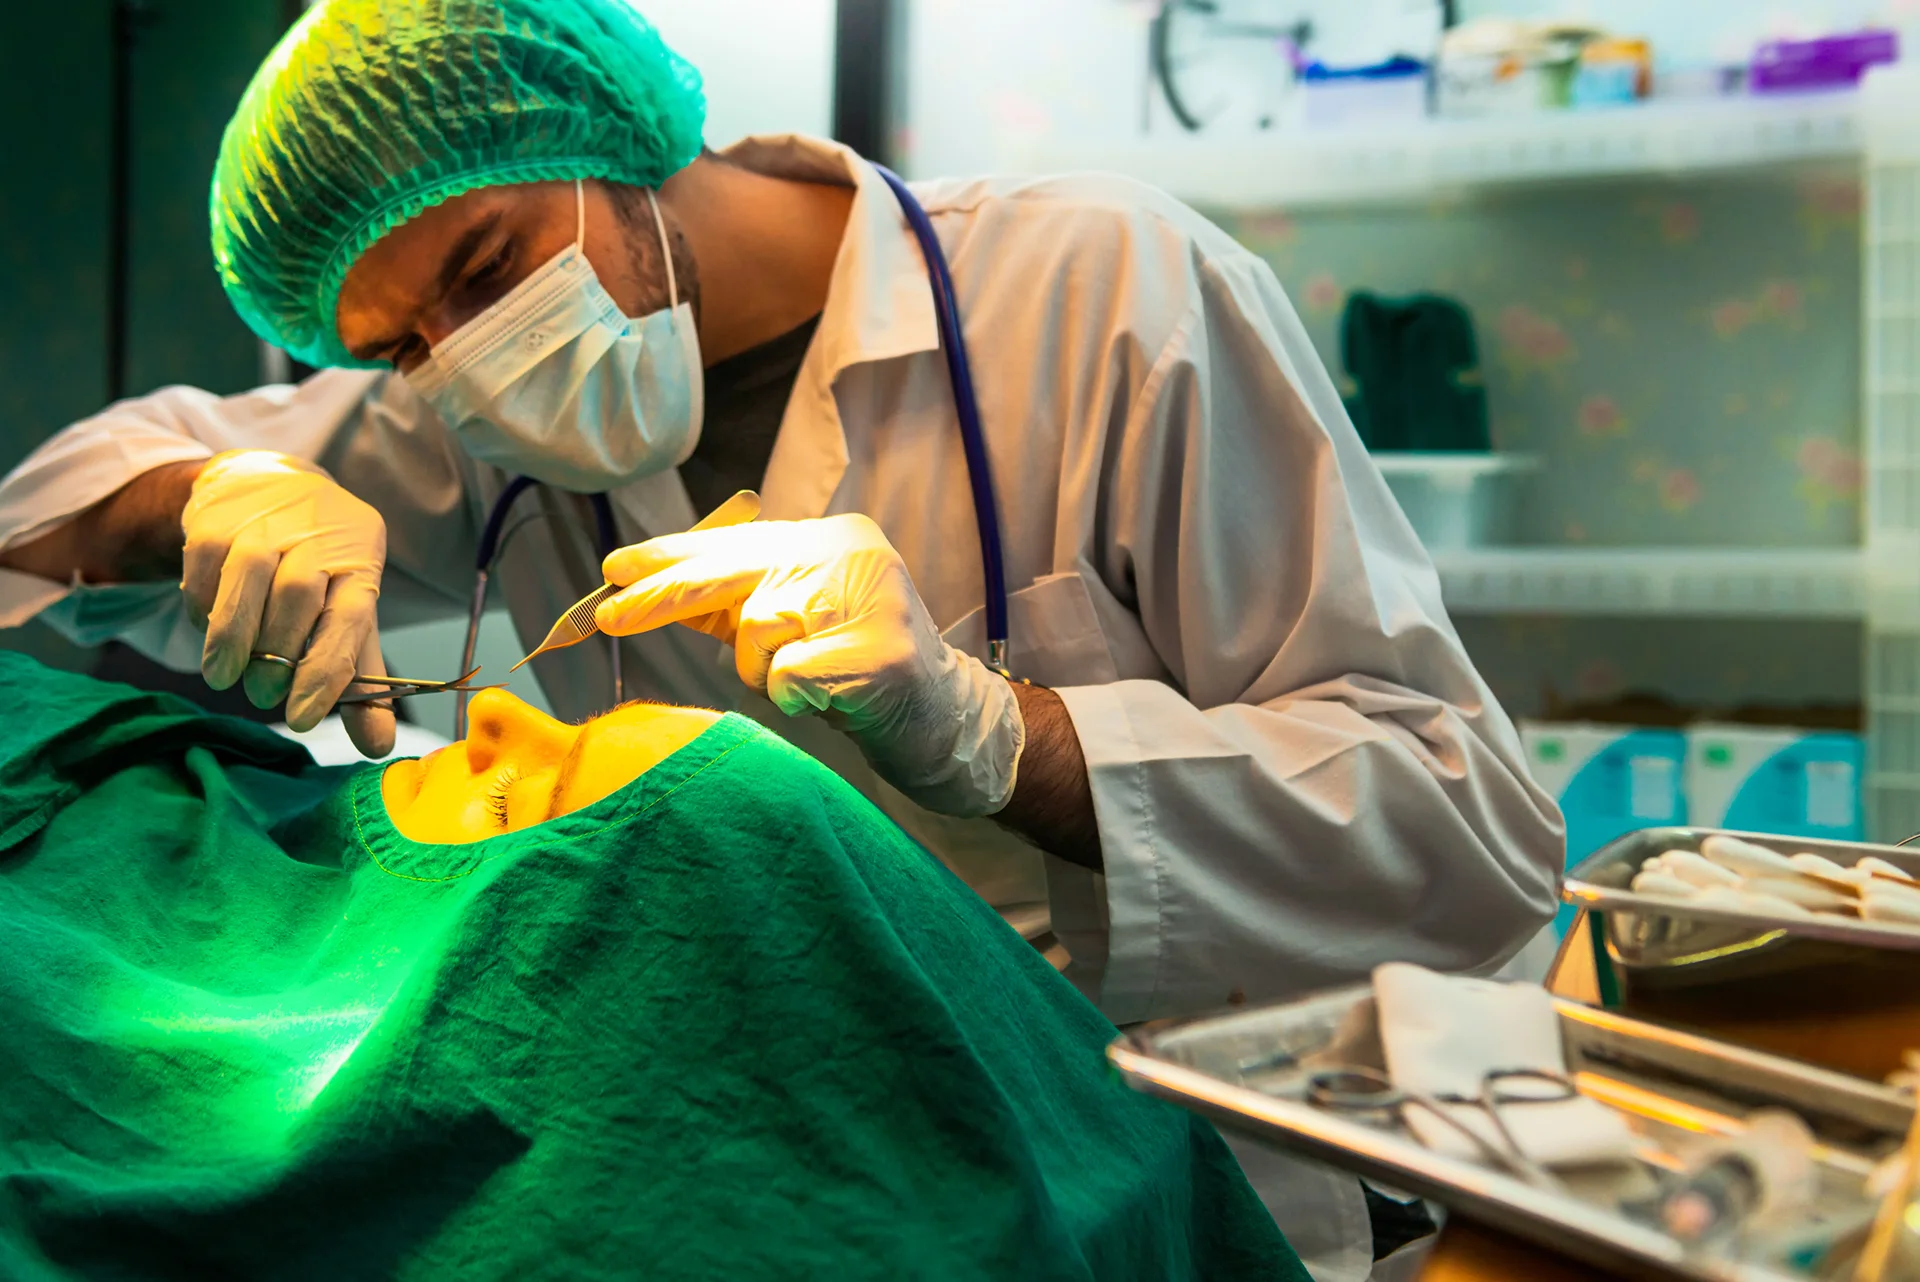 a surgeon performs surgery on a patient